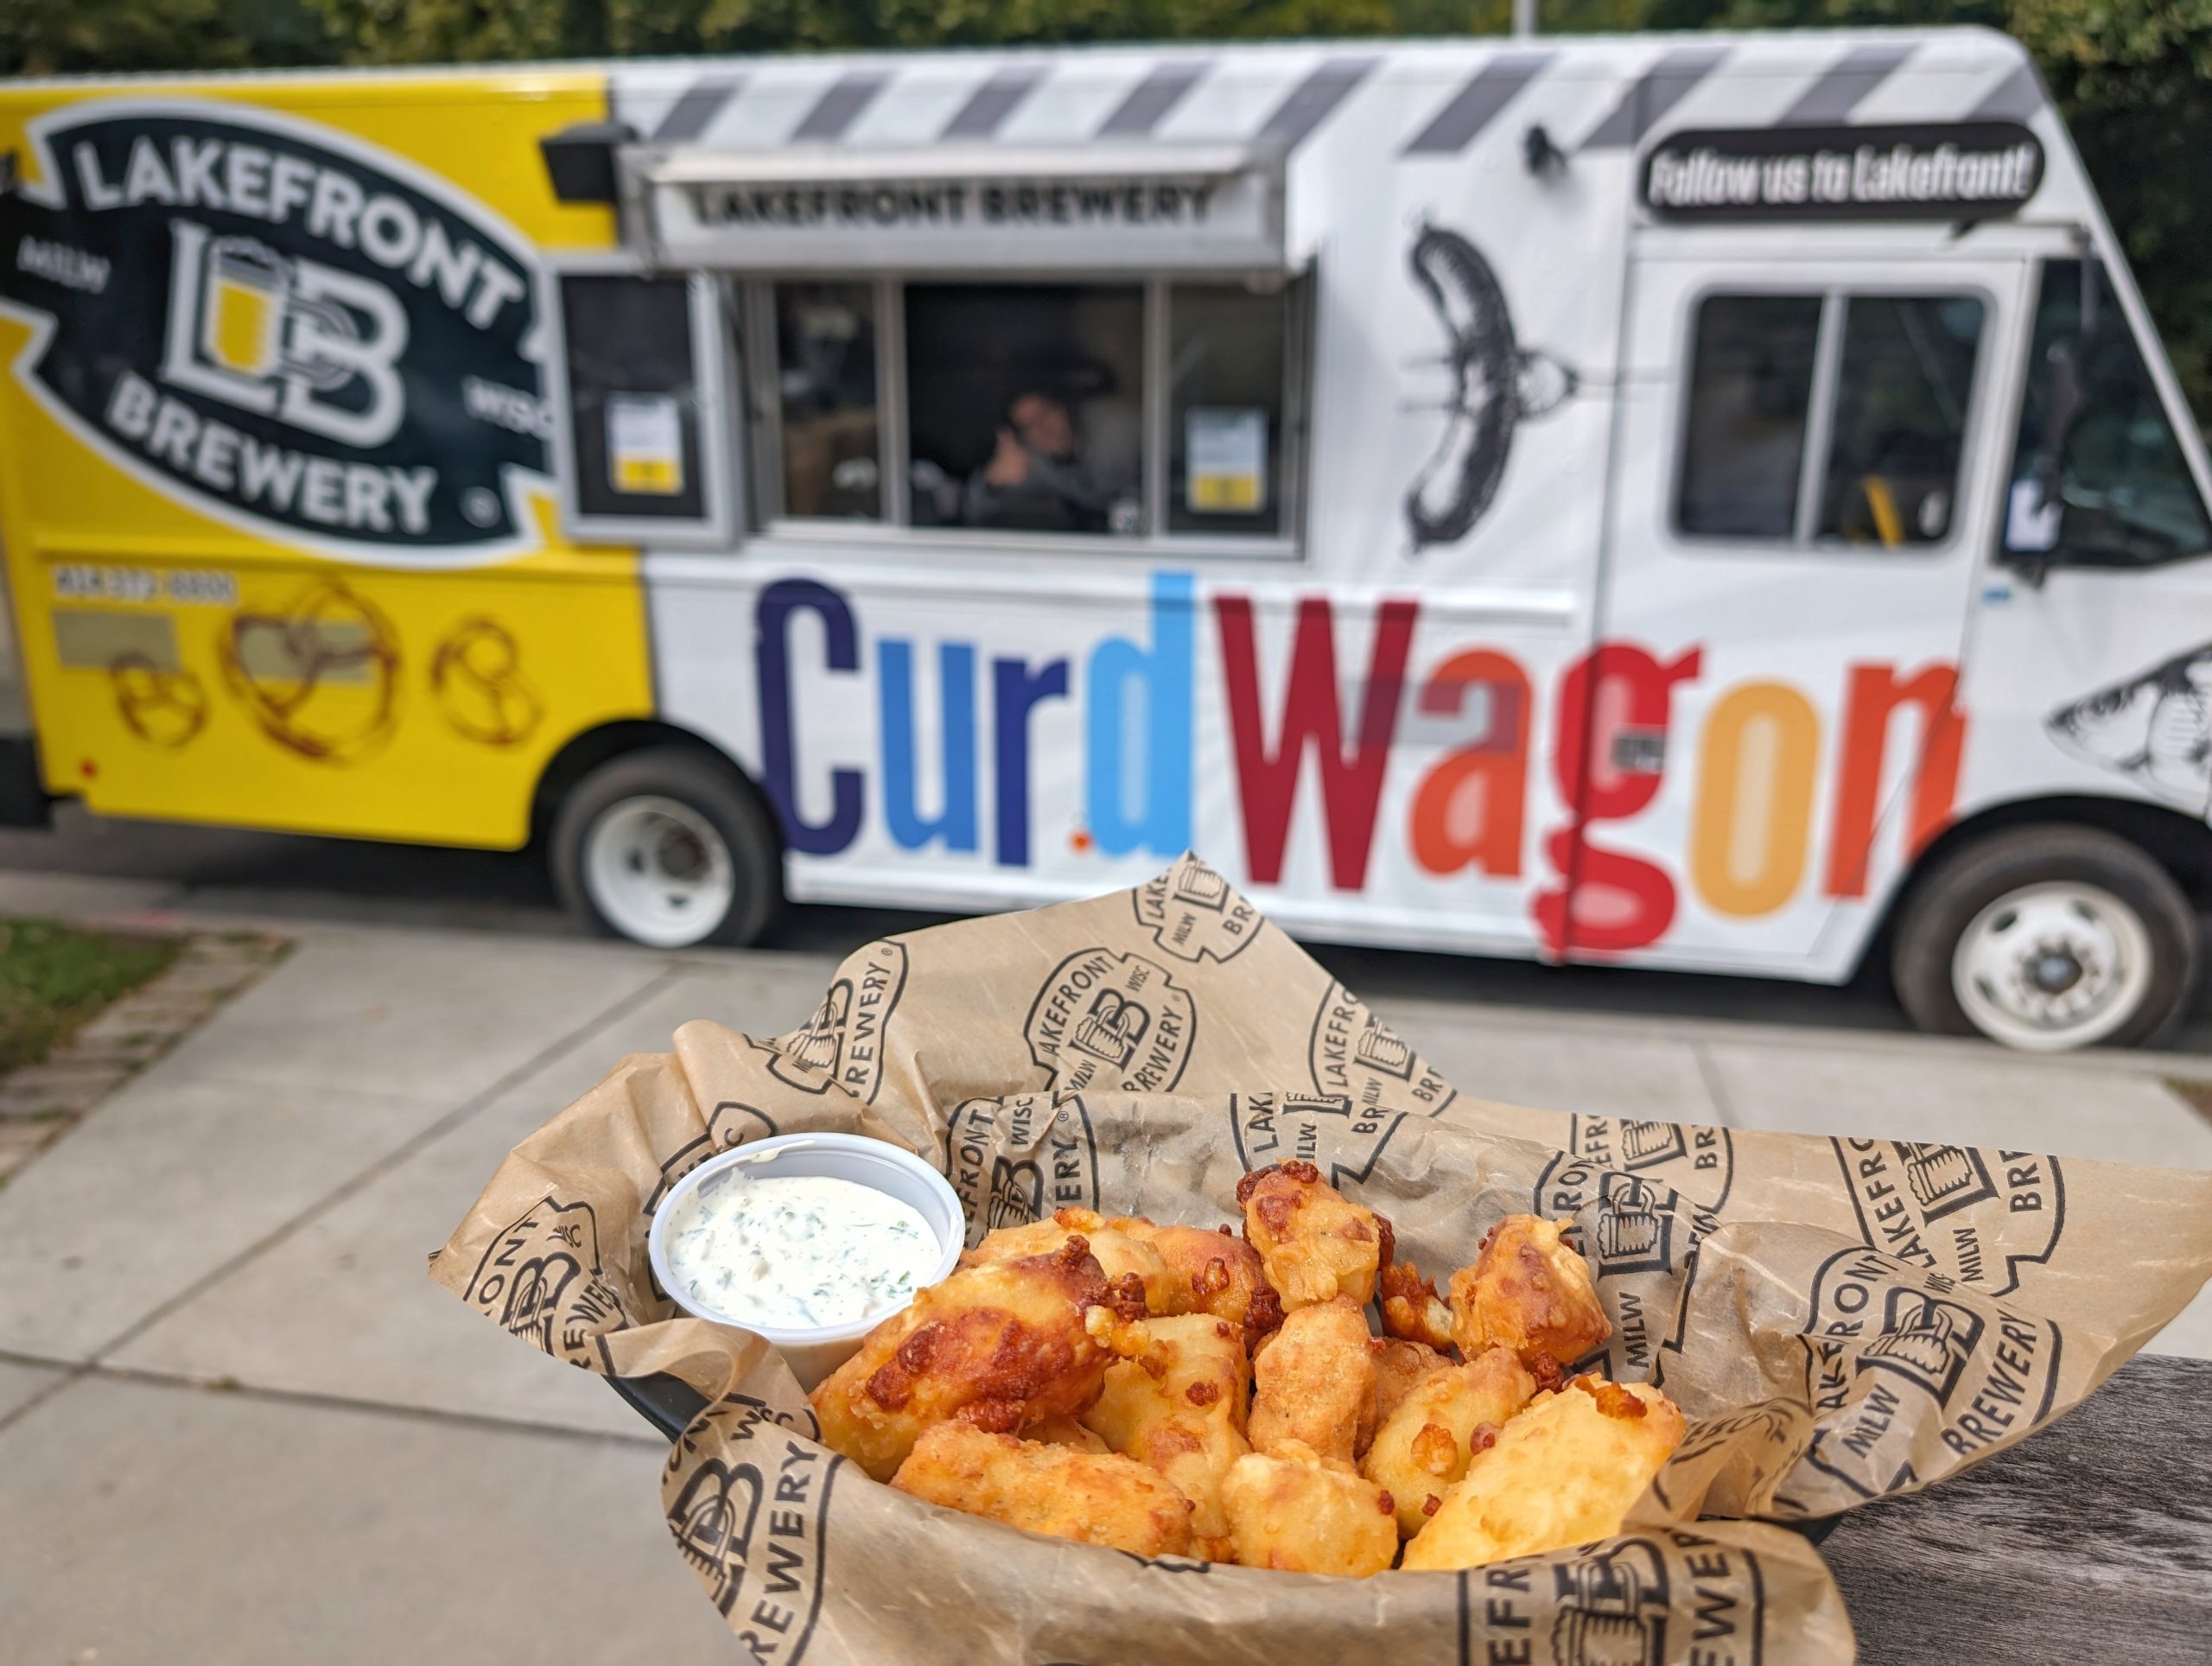 Lakefront Brewery’s CurdWagon Food Truck Goes All Gluten-free